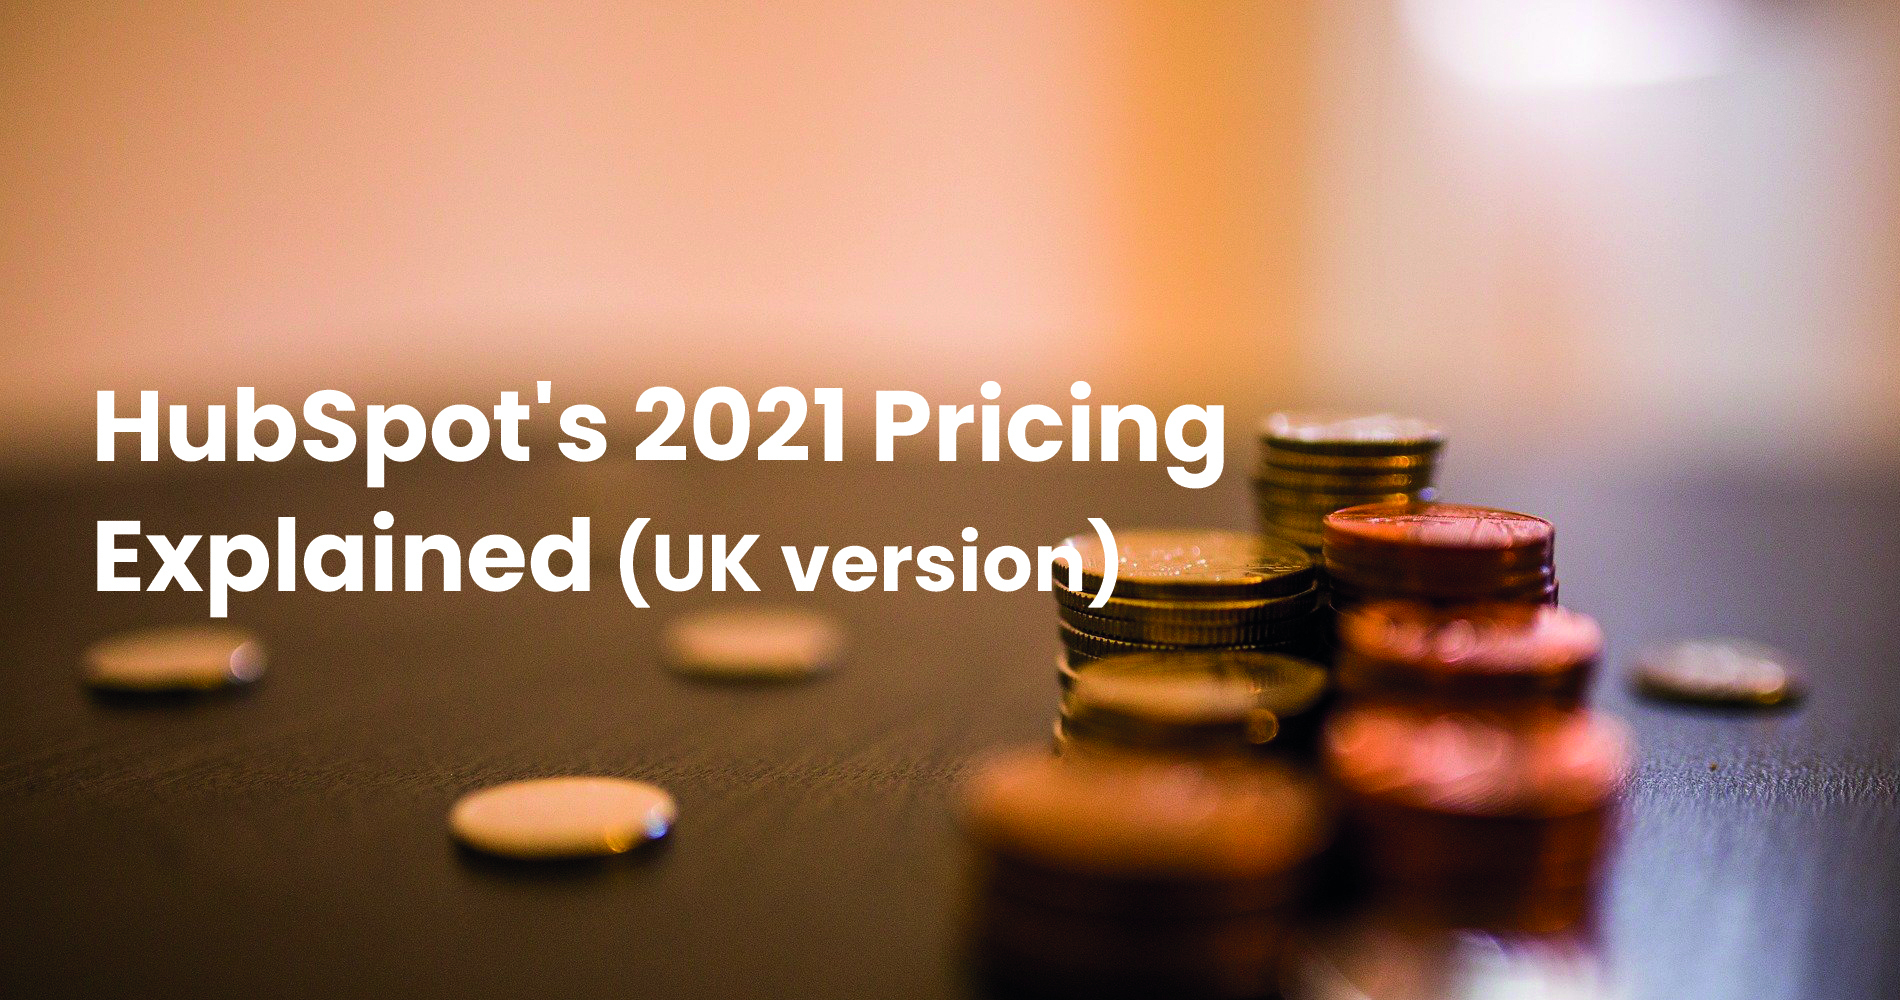 HubSpot's 2021 Pricing Explained (UK version)